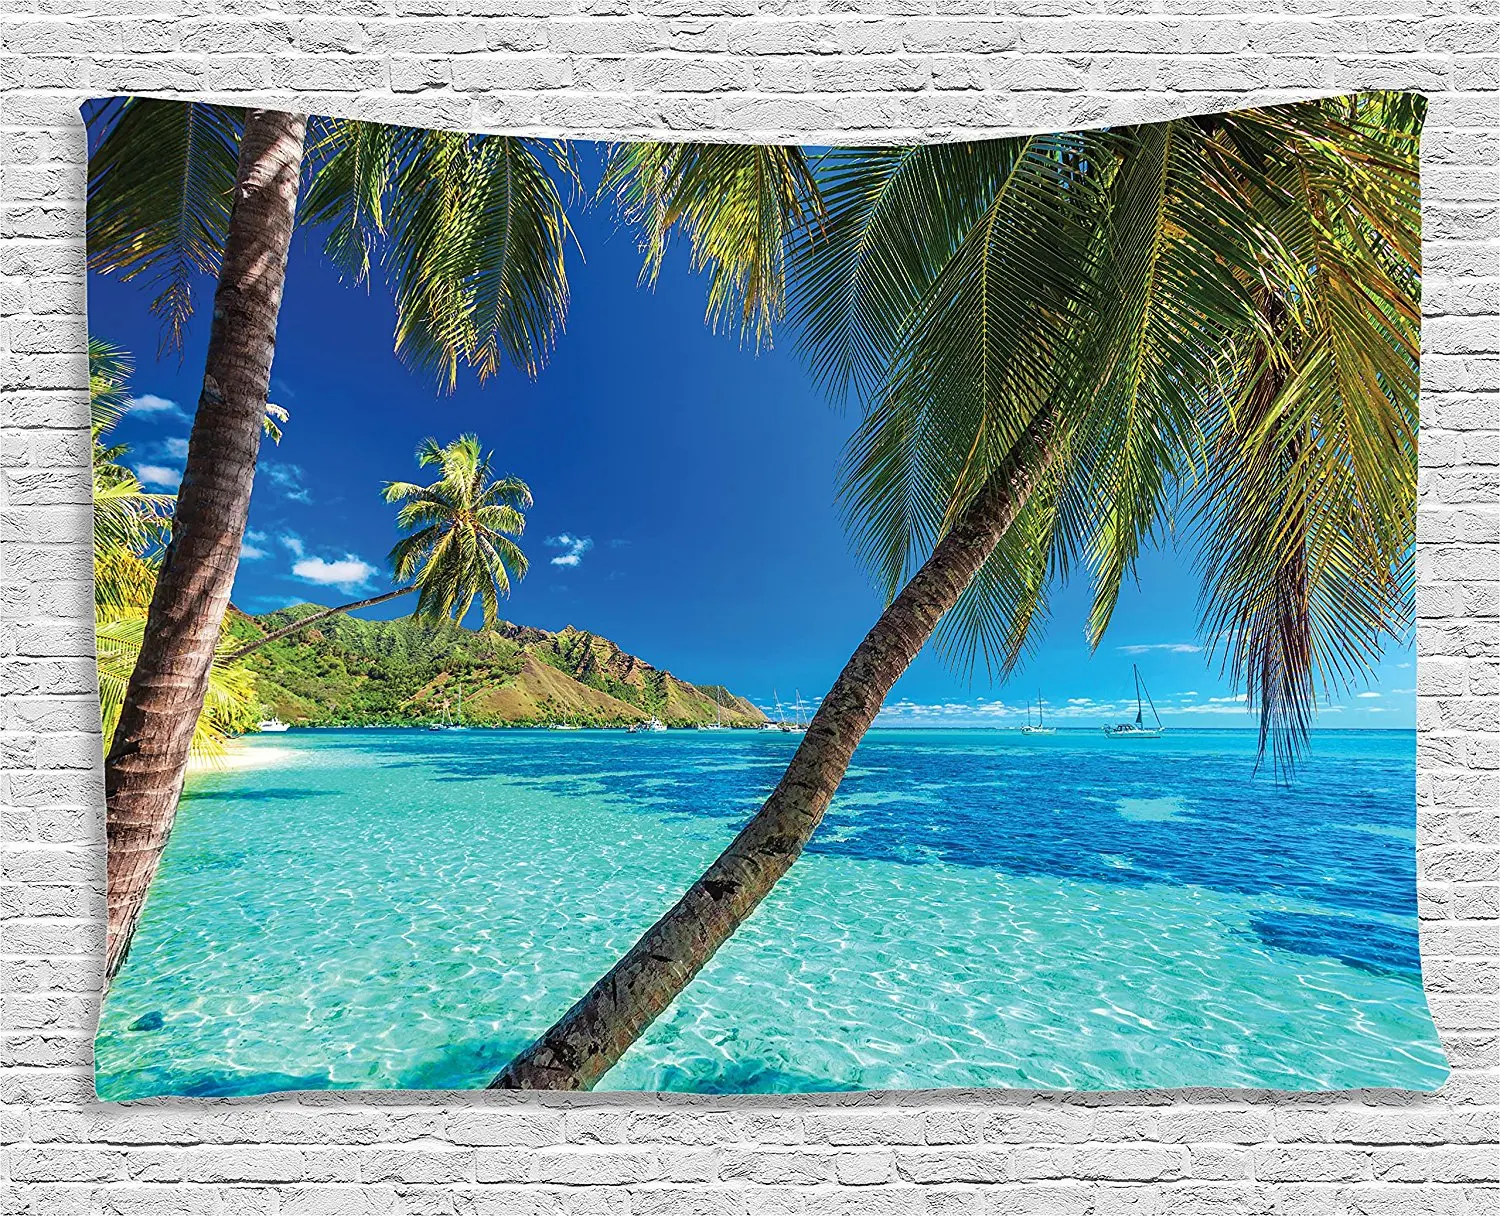 

Ocean Decor Tapestry Image of a Tropical Island with Palm Trees and Bright Sea Beach Theme Print Decor Wall Hanging for Dorm